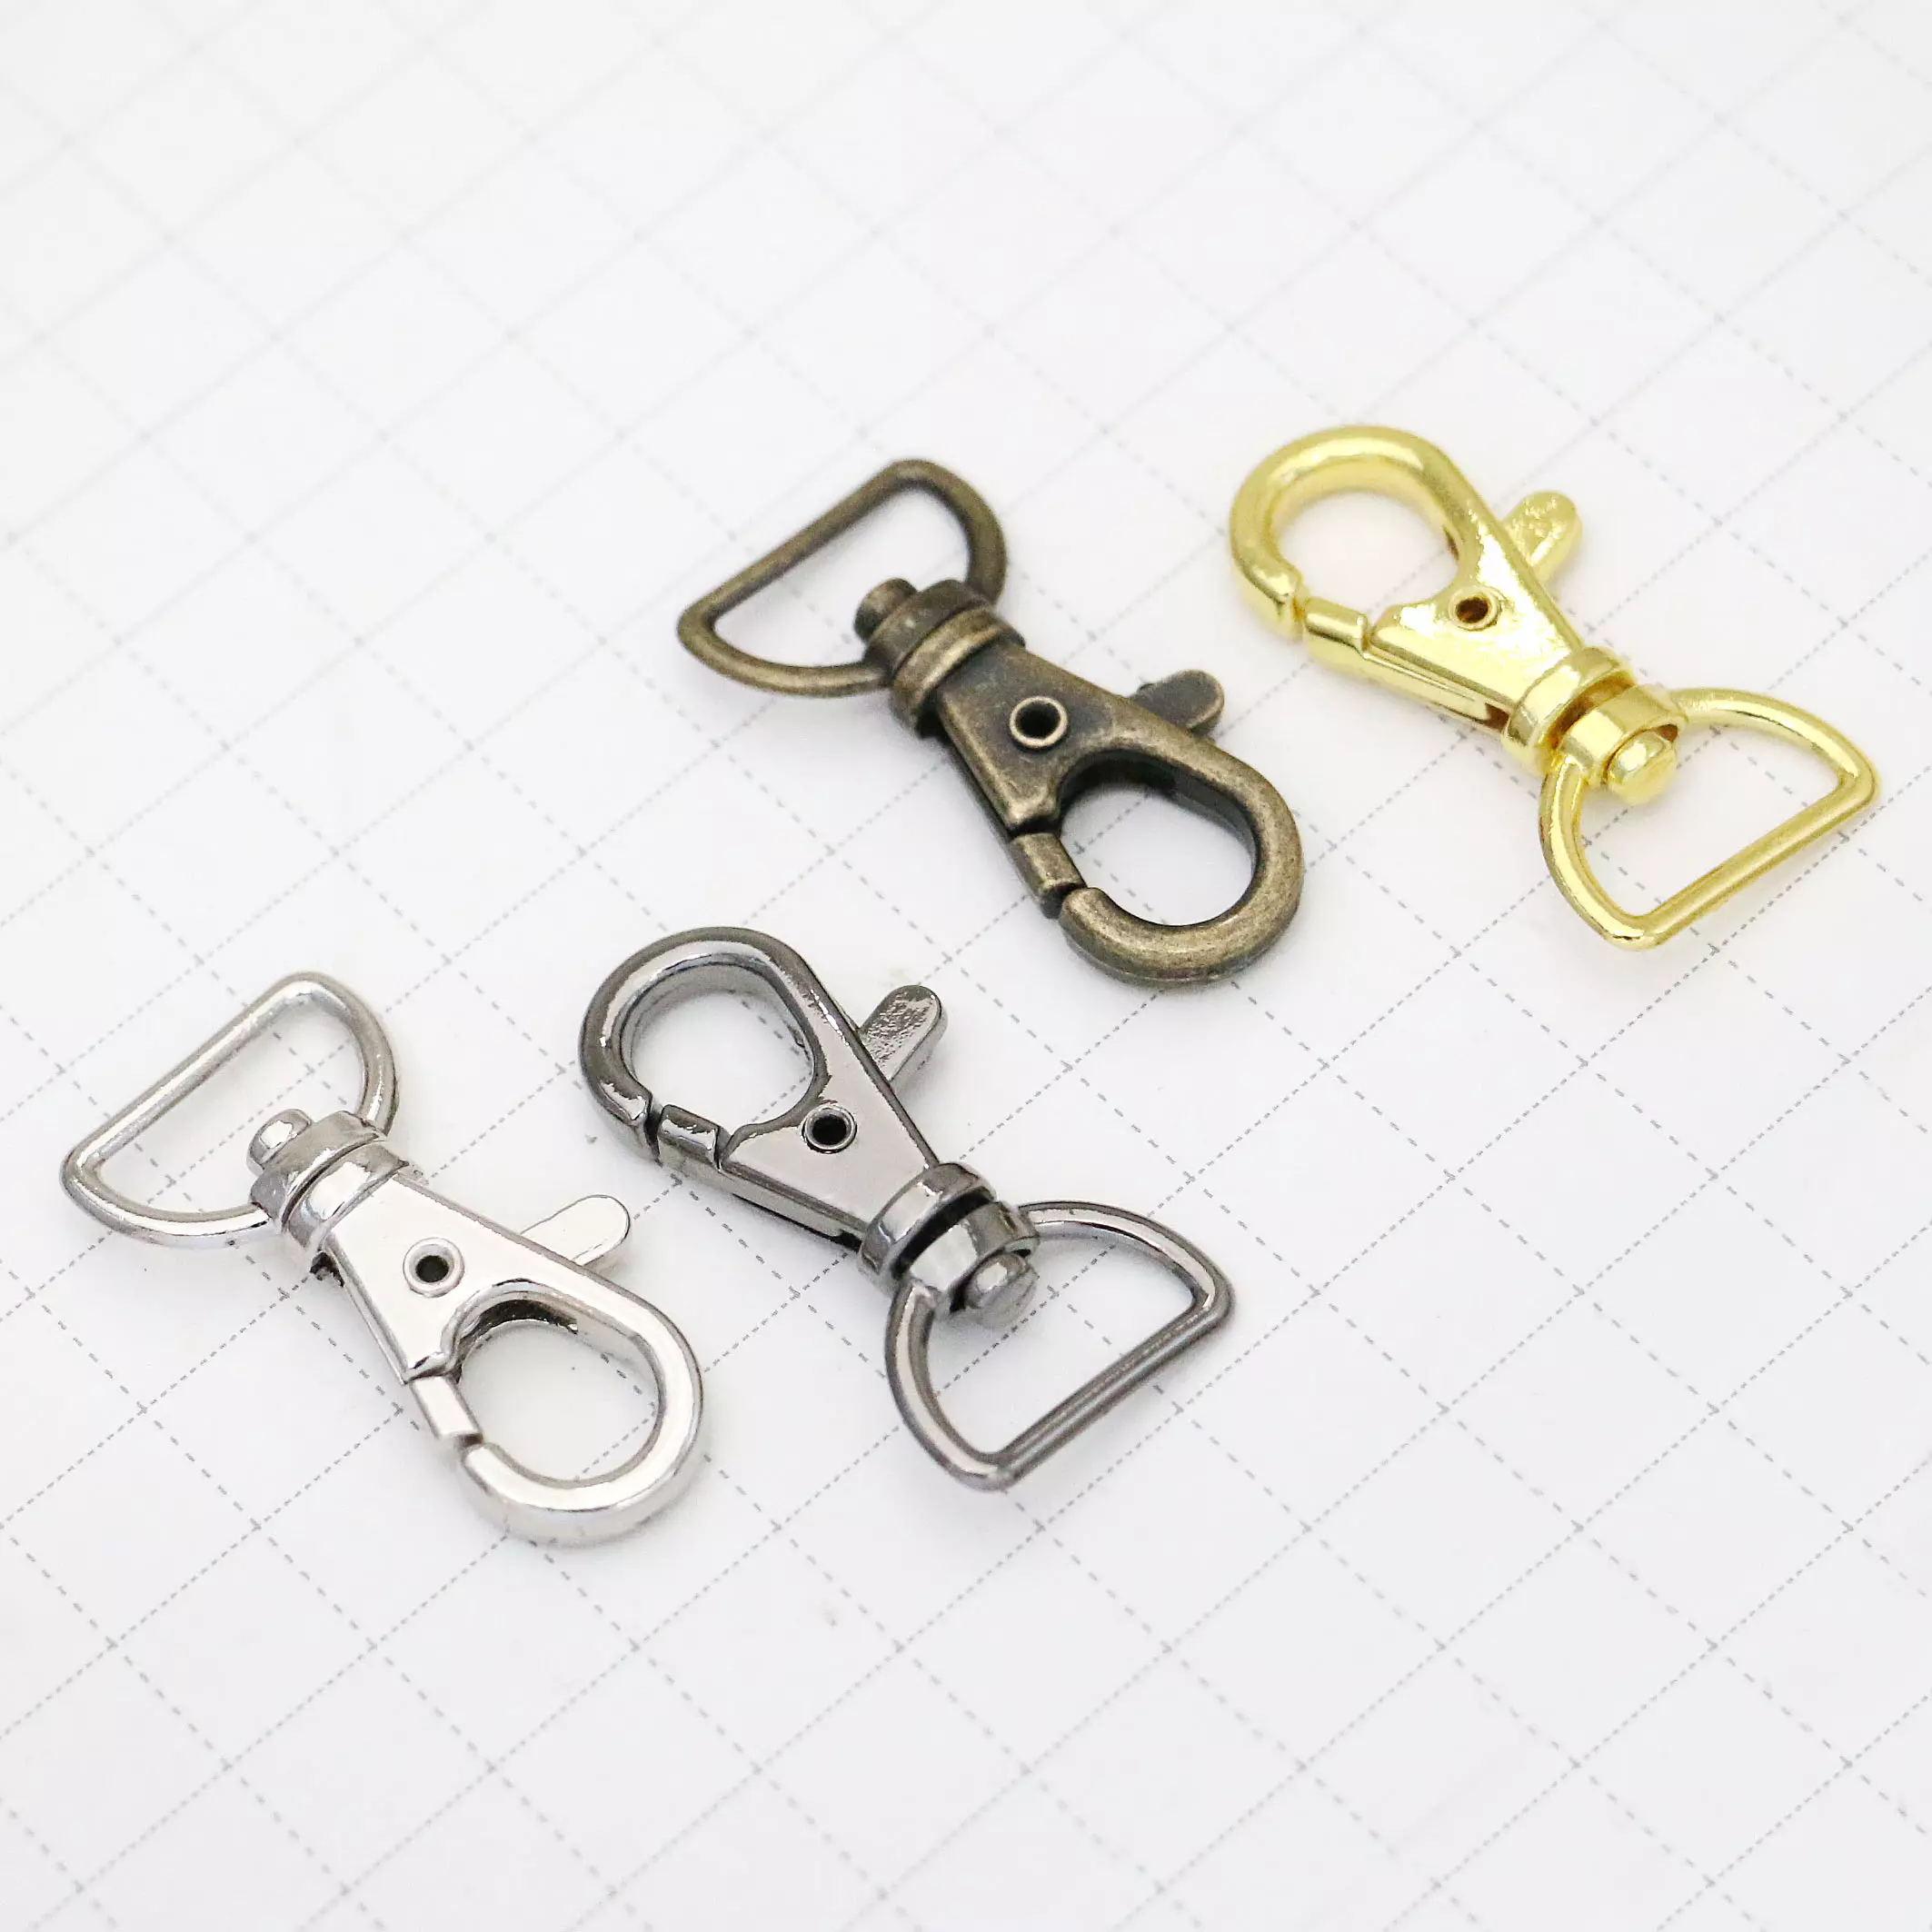 Silver/gold Metal Square Swivel Clasp, Keychain Lobster Clasp